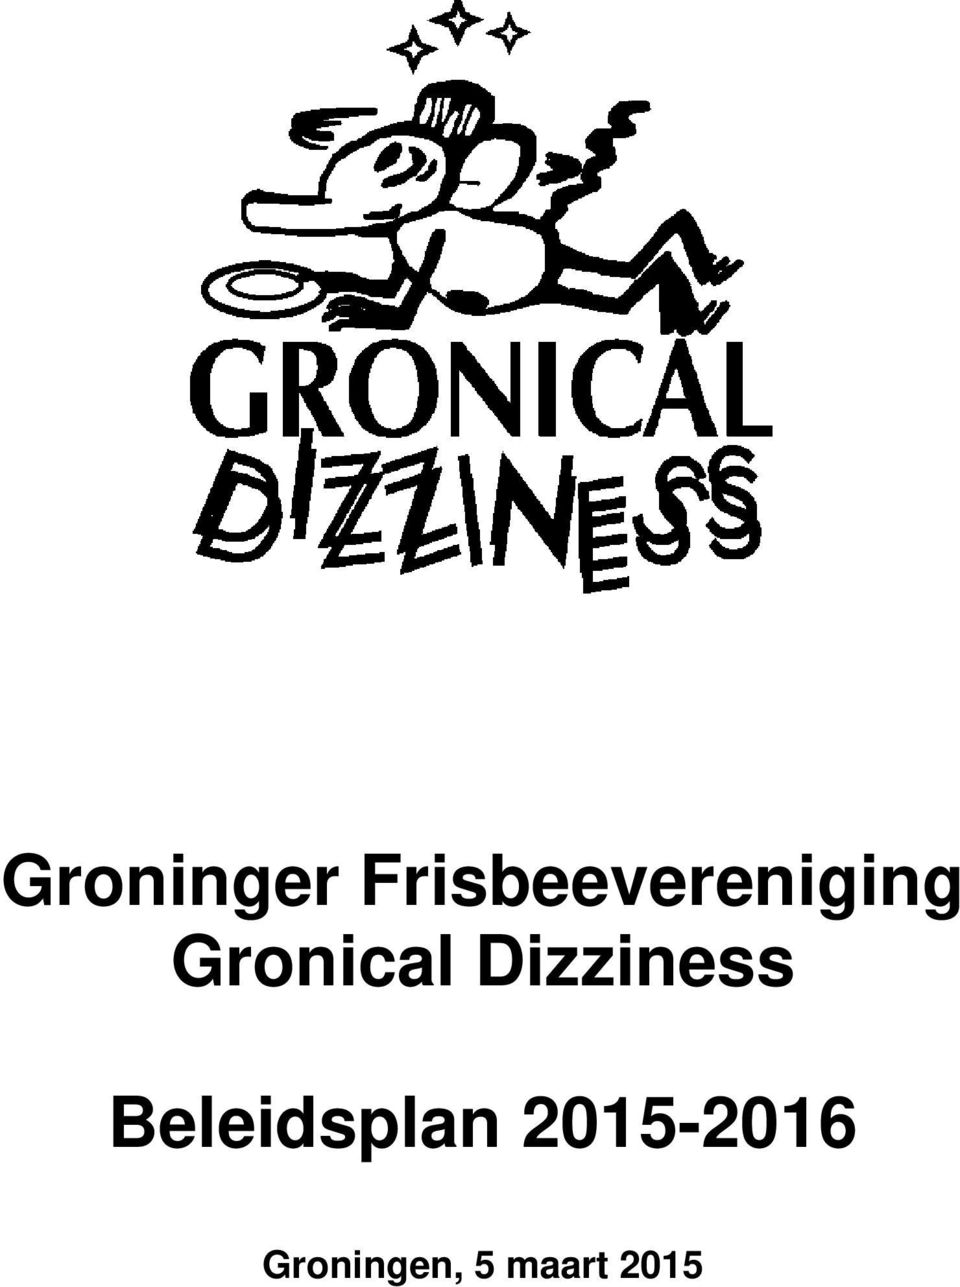 Gronical Dizziness